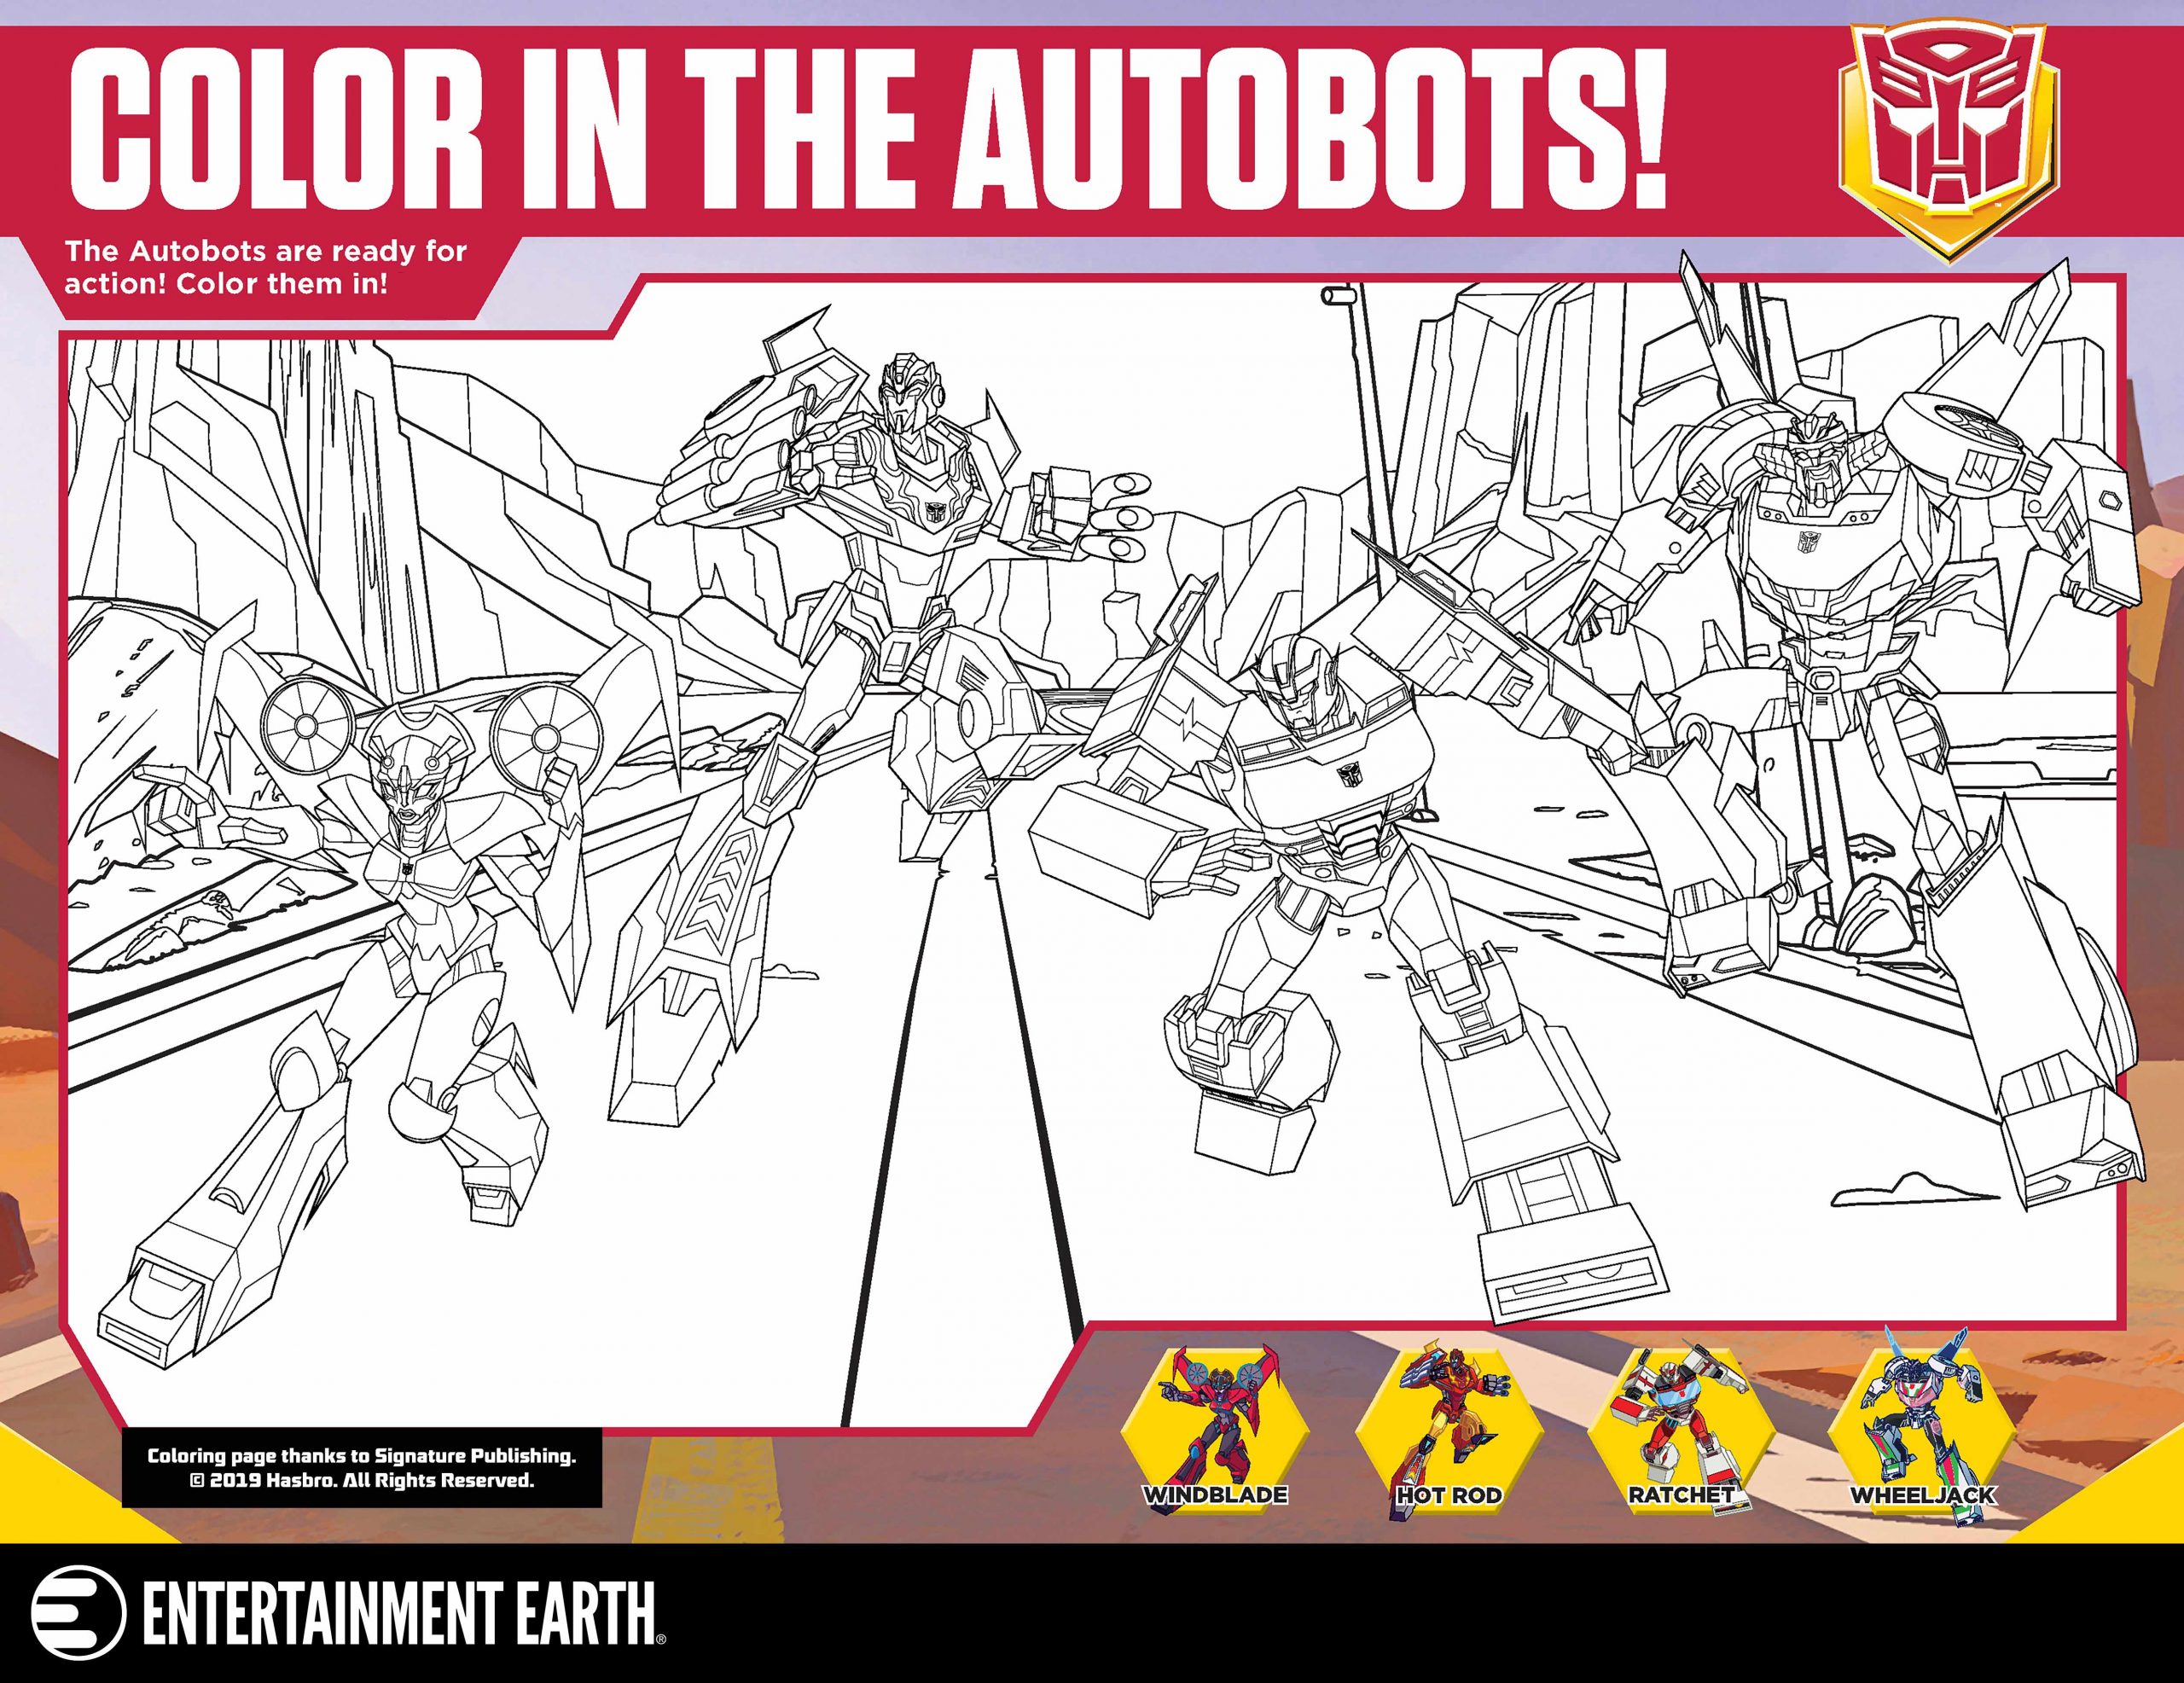 Color in the Autobots!